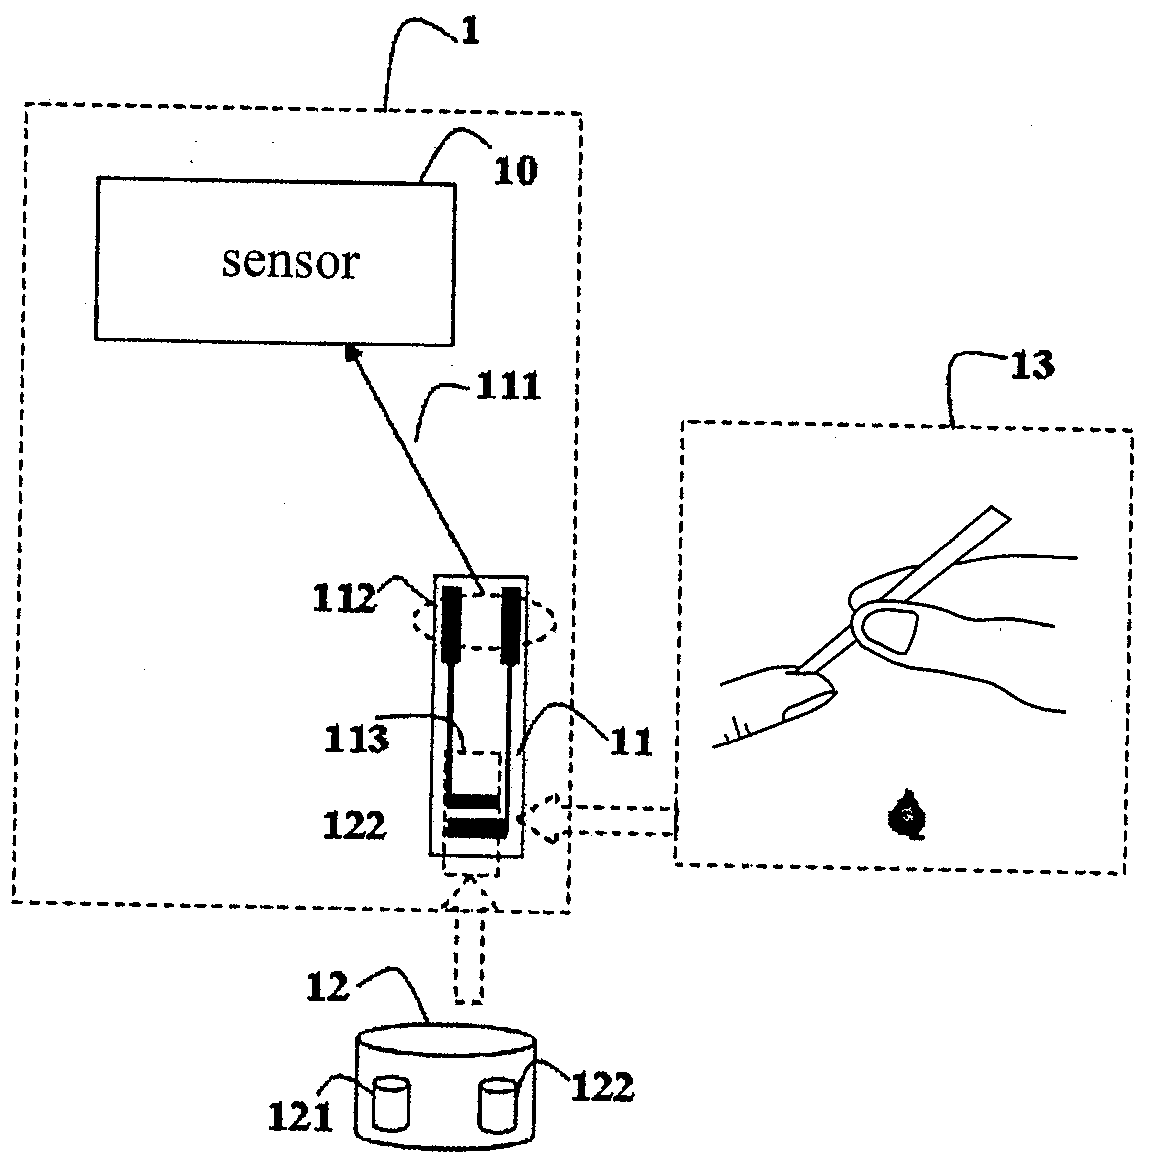 Biosensor, Biostrip, and Manufacture Method of Determination of Uric Acid by a Non-Enzymatic Reagent